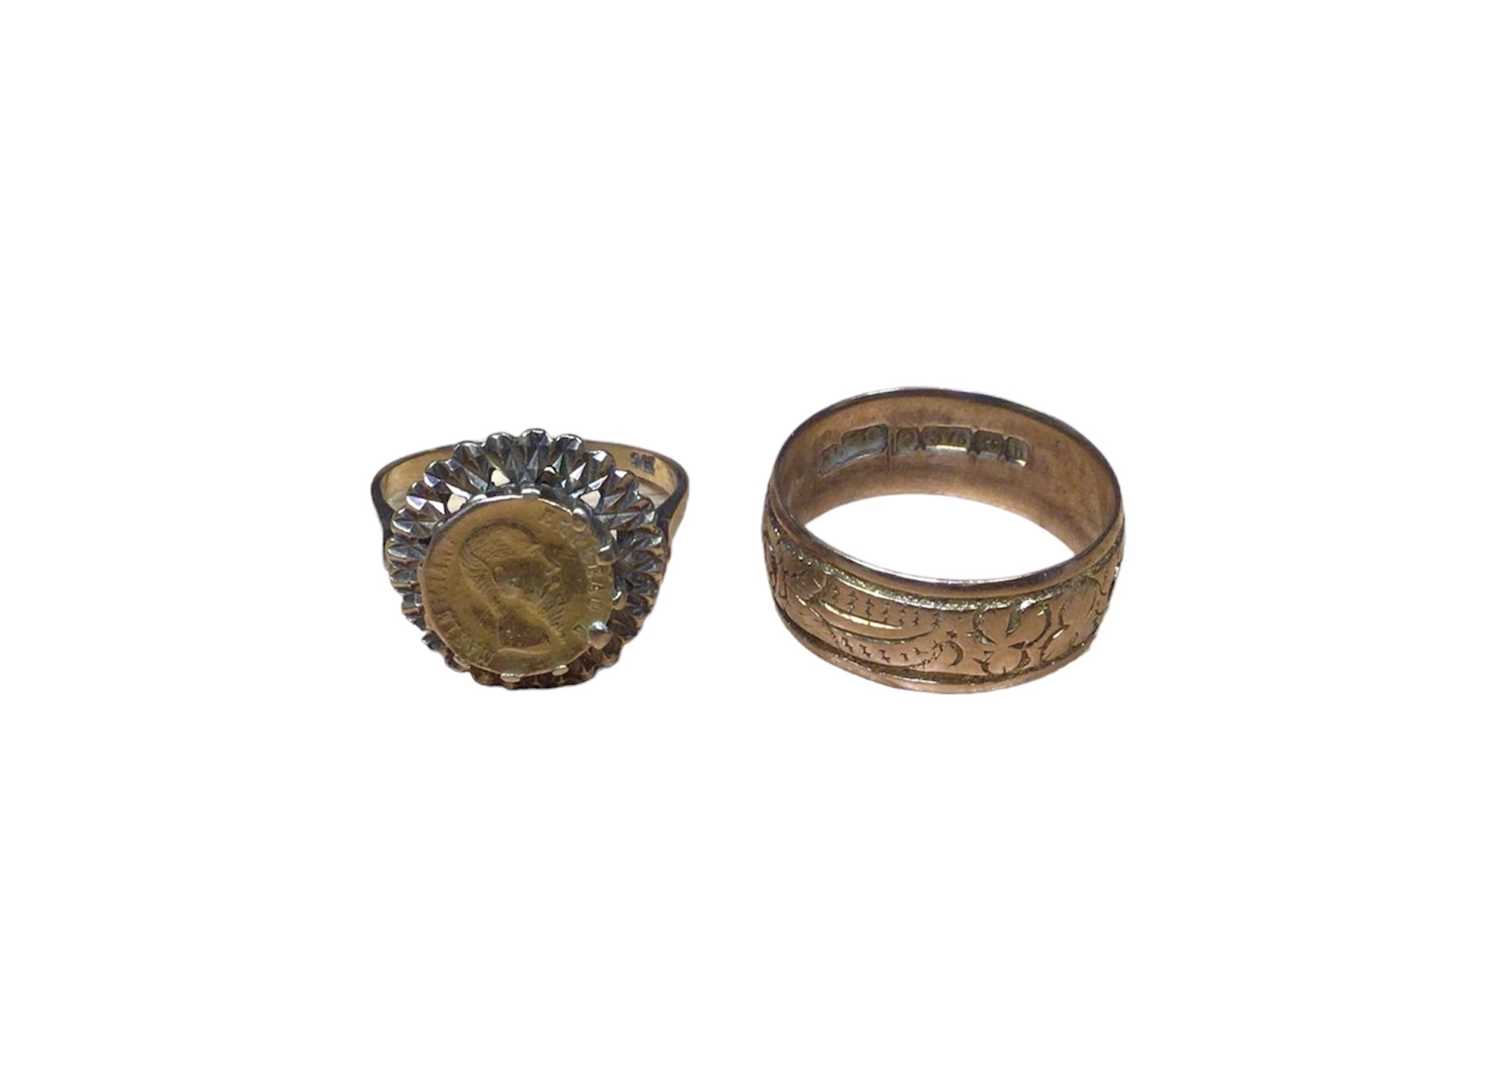 Lot 5 - 9ct gold mounted Mexican coin ring and 9ct gold wedding ring with foliate decoration